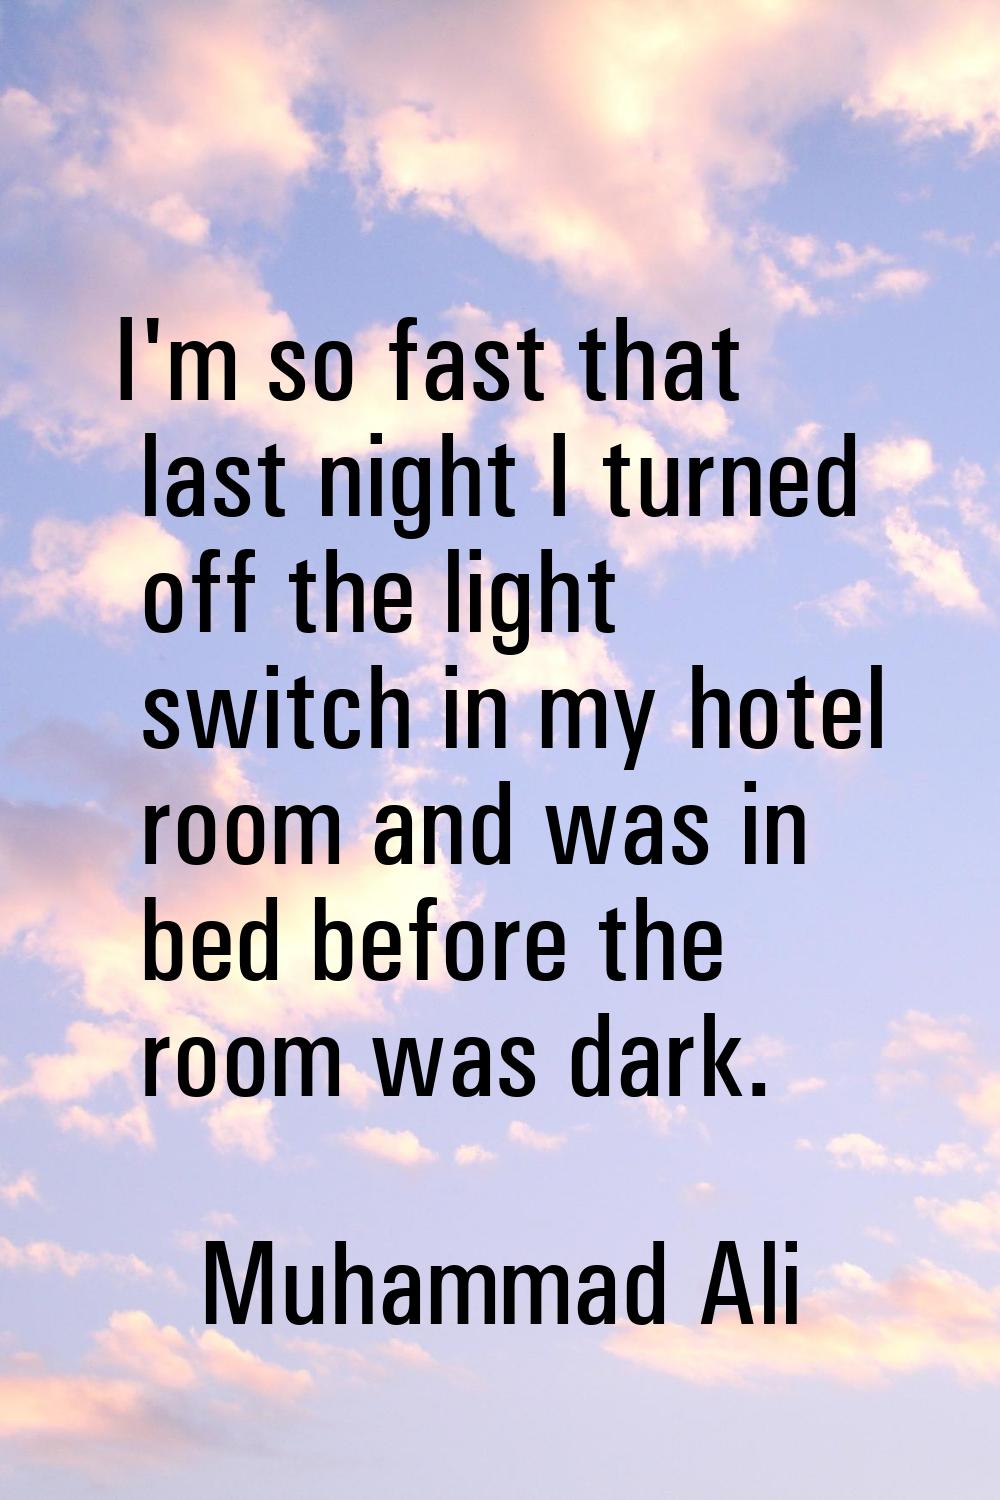 I'm so fast that last night I turned off the light switch in my hotel room and was in bed before th